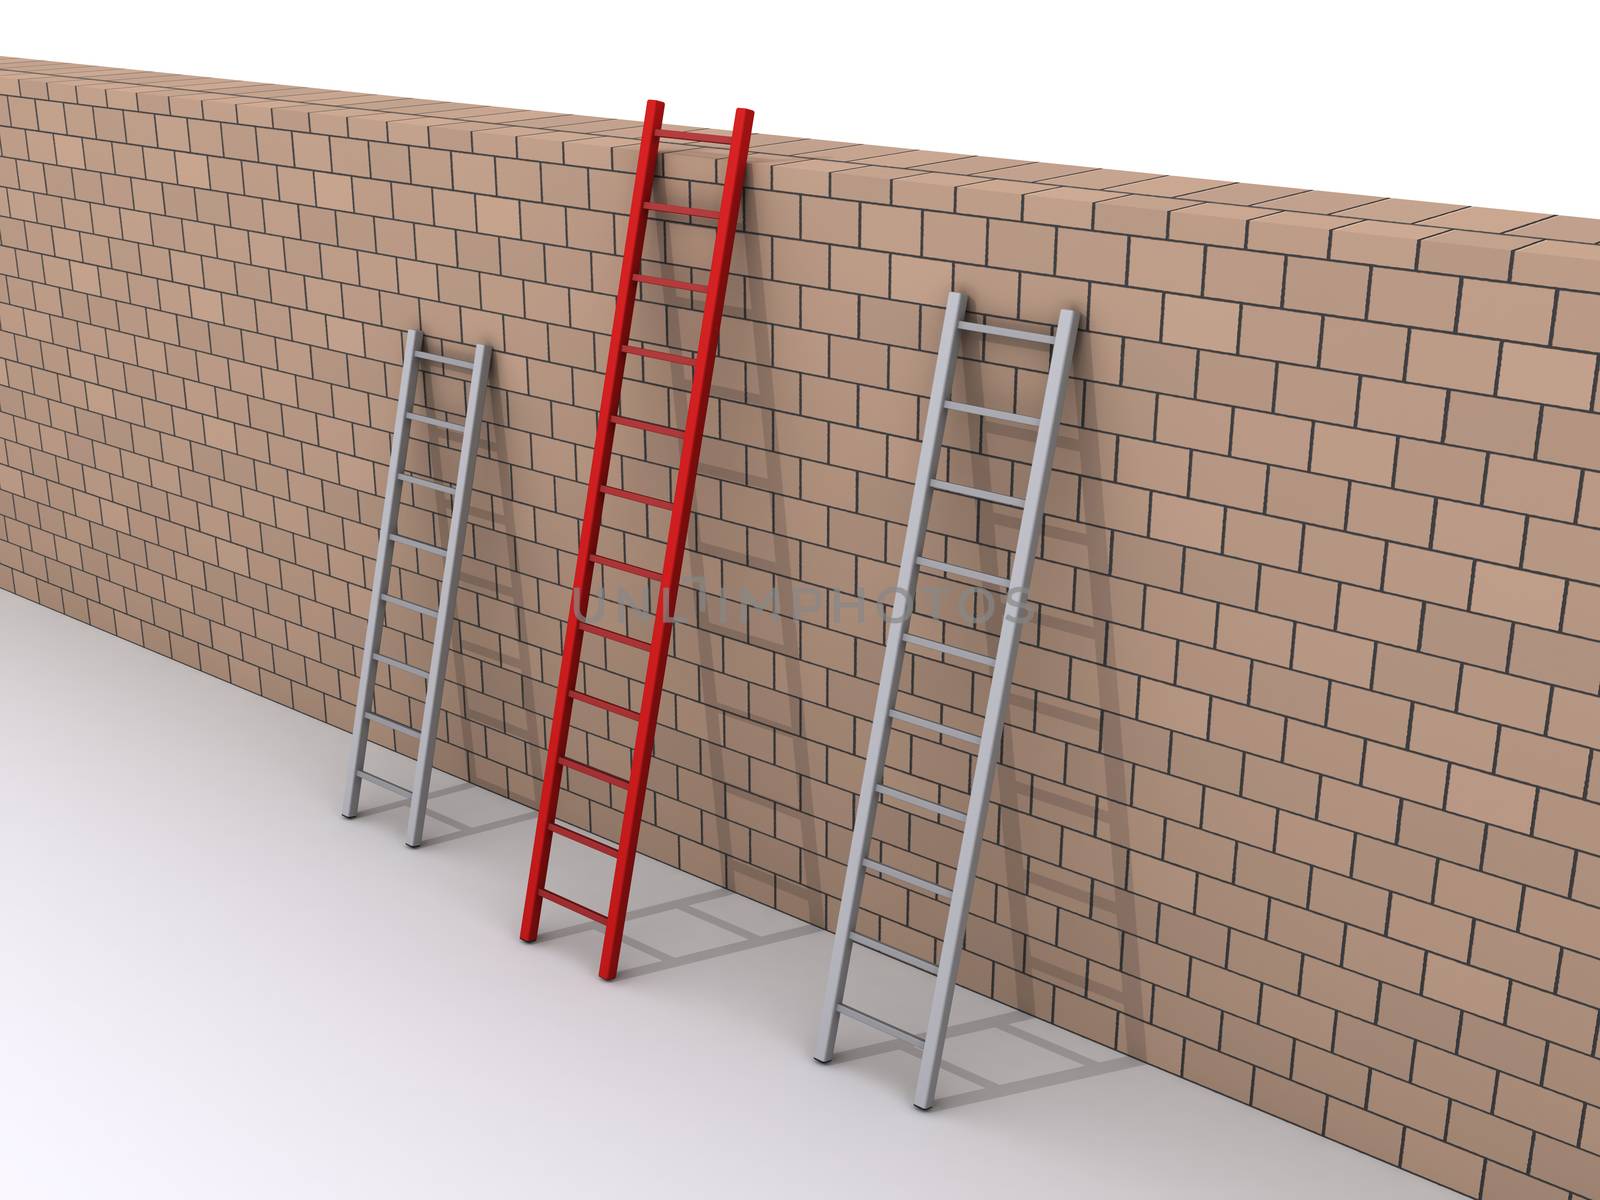 Three ladders are leaning against a wall, but one is bigger